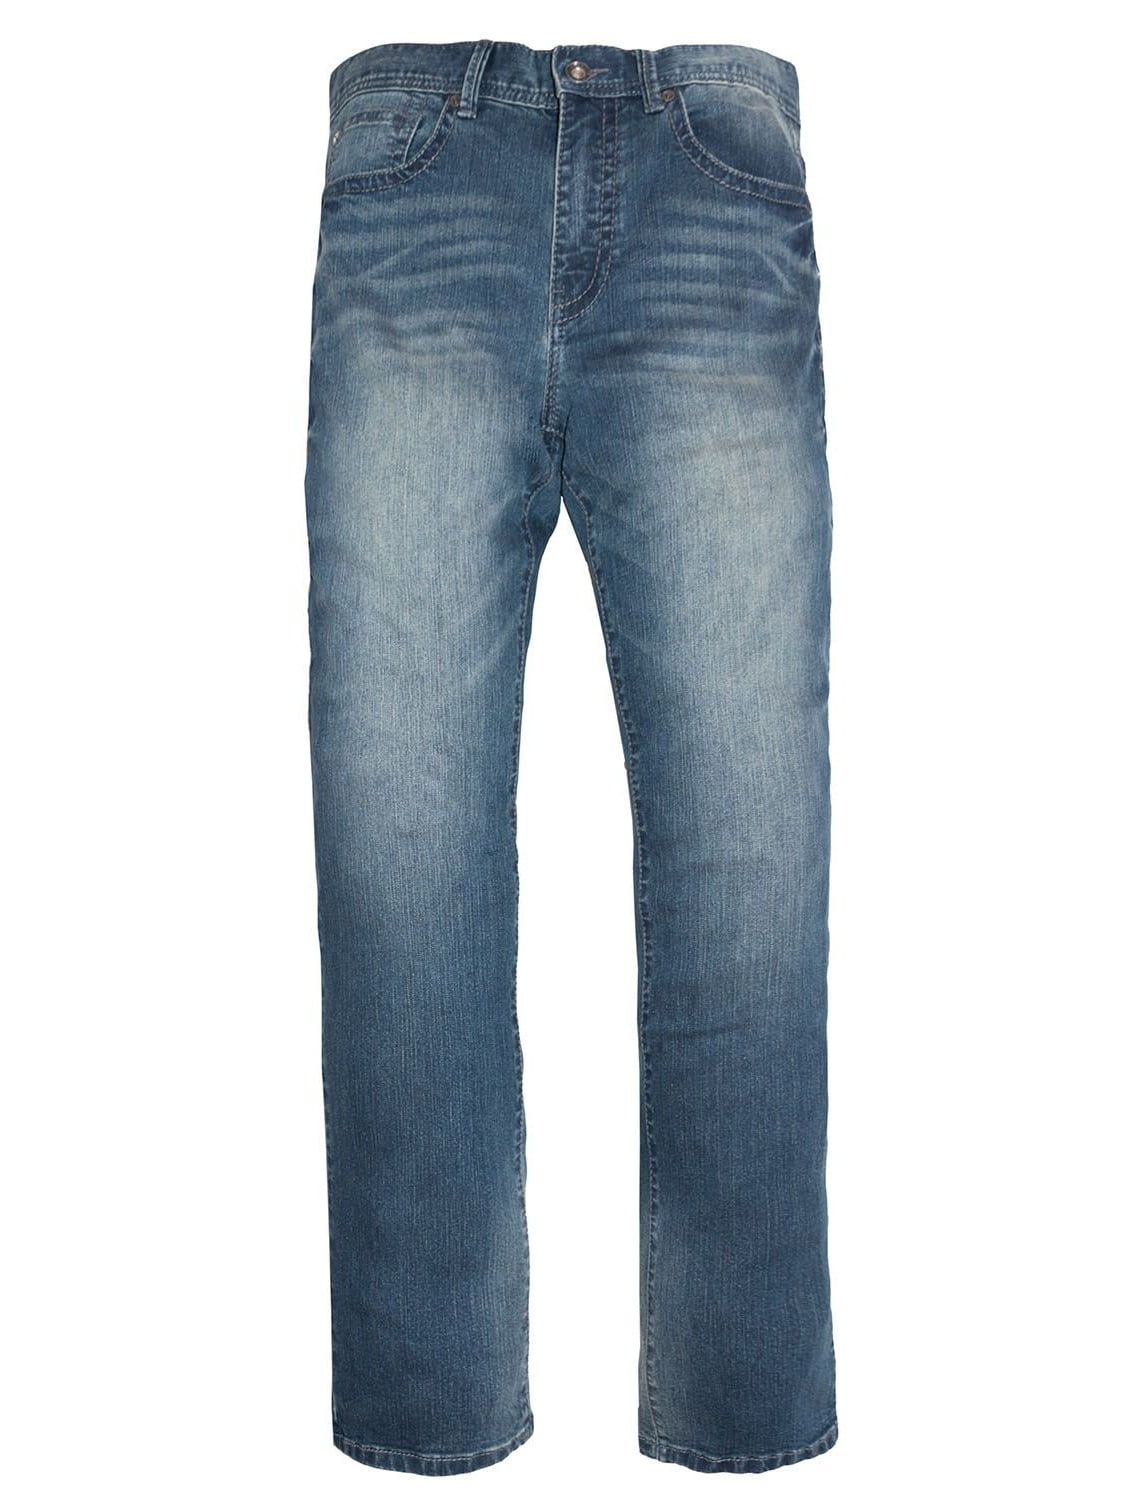 axel jeans for men